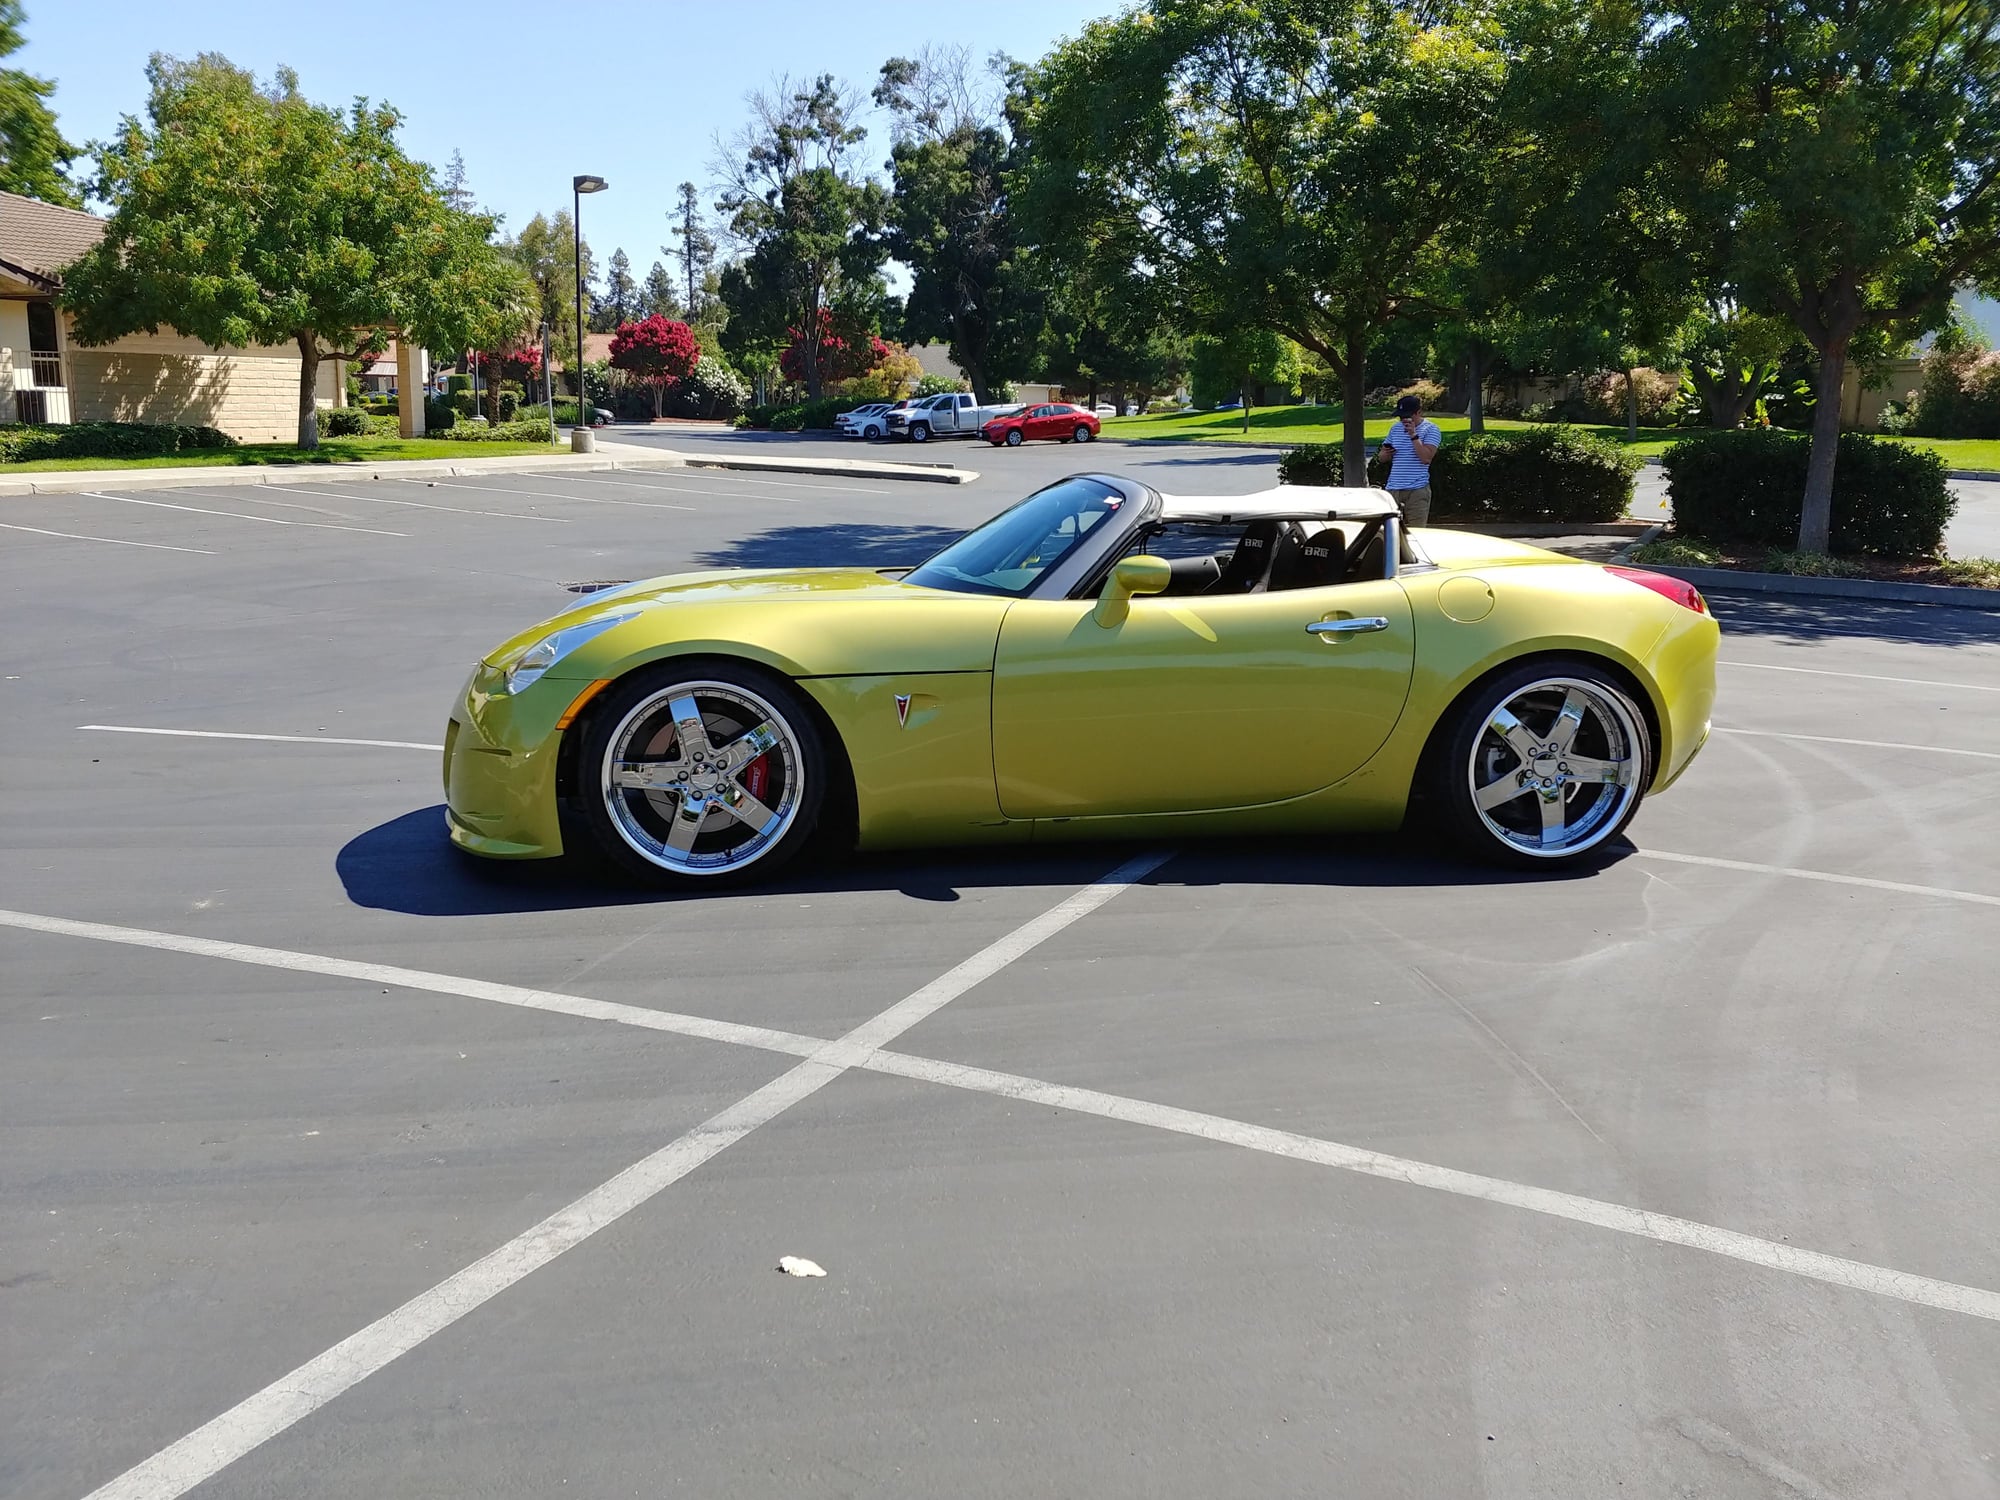 2006 Pontiac Solstice - For Sale - Northern California: 2006 Pontiac Solstice 2.4L 5 Speed Manual Race Car - Used - VIN 1G2MB35B06Y114554 - 880 Miles - 4 cyl - 2WD - Manual - Convertible - Other - San Jose, CA 92101, United States